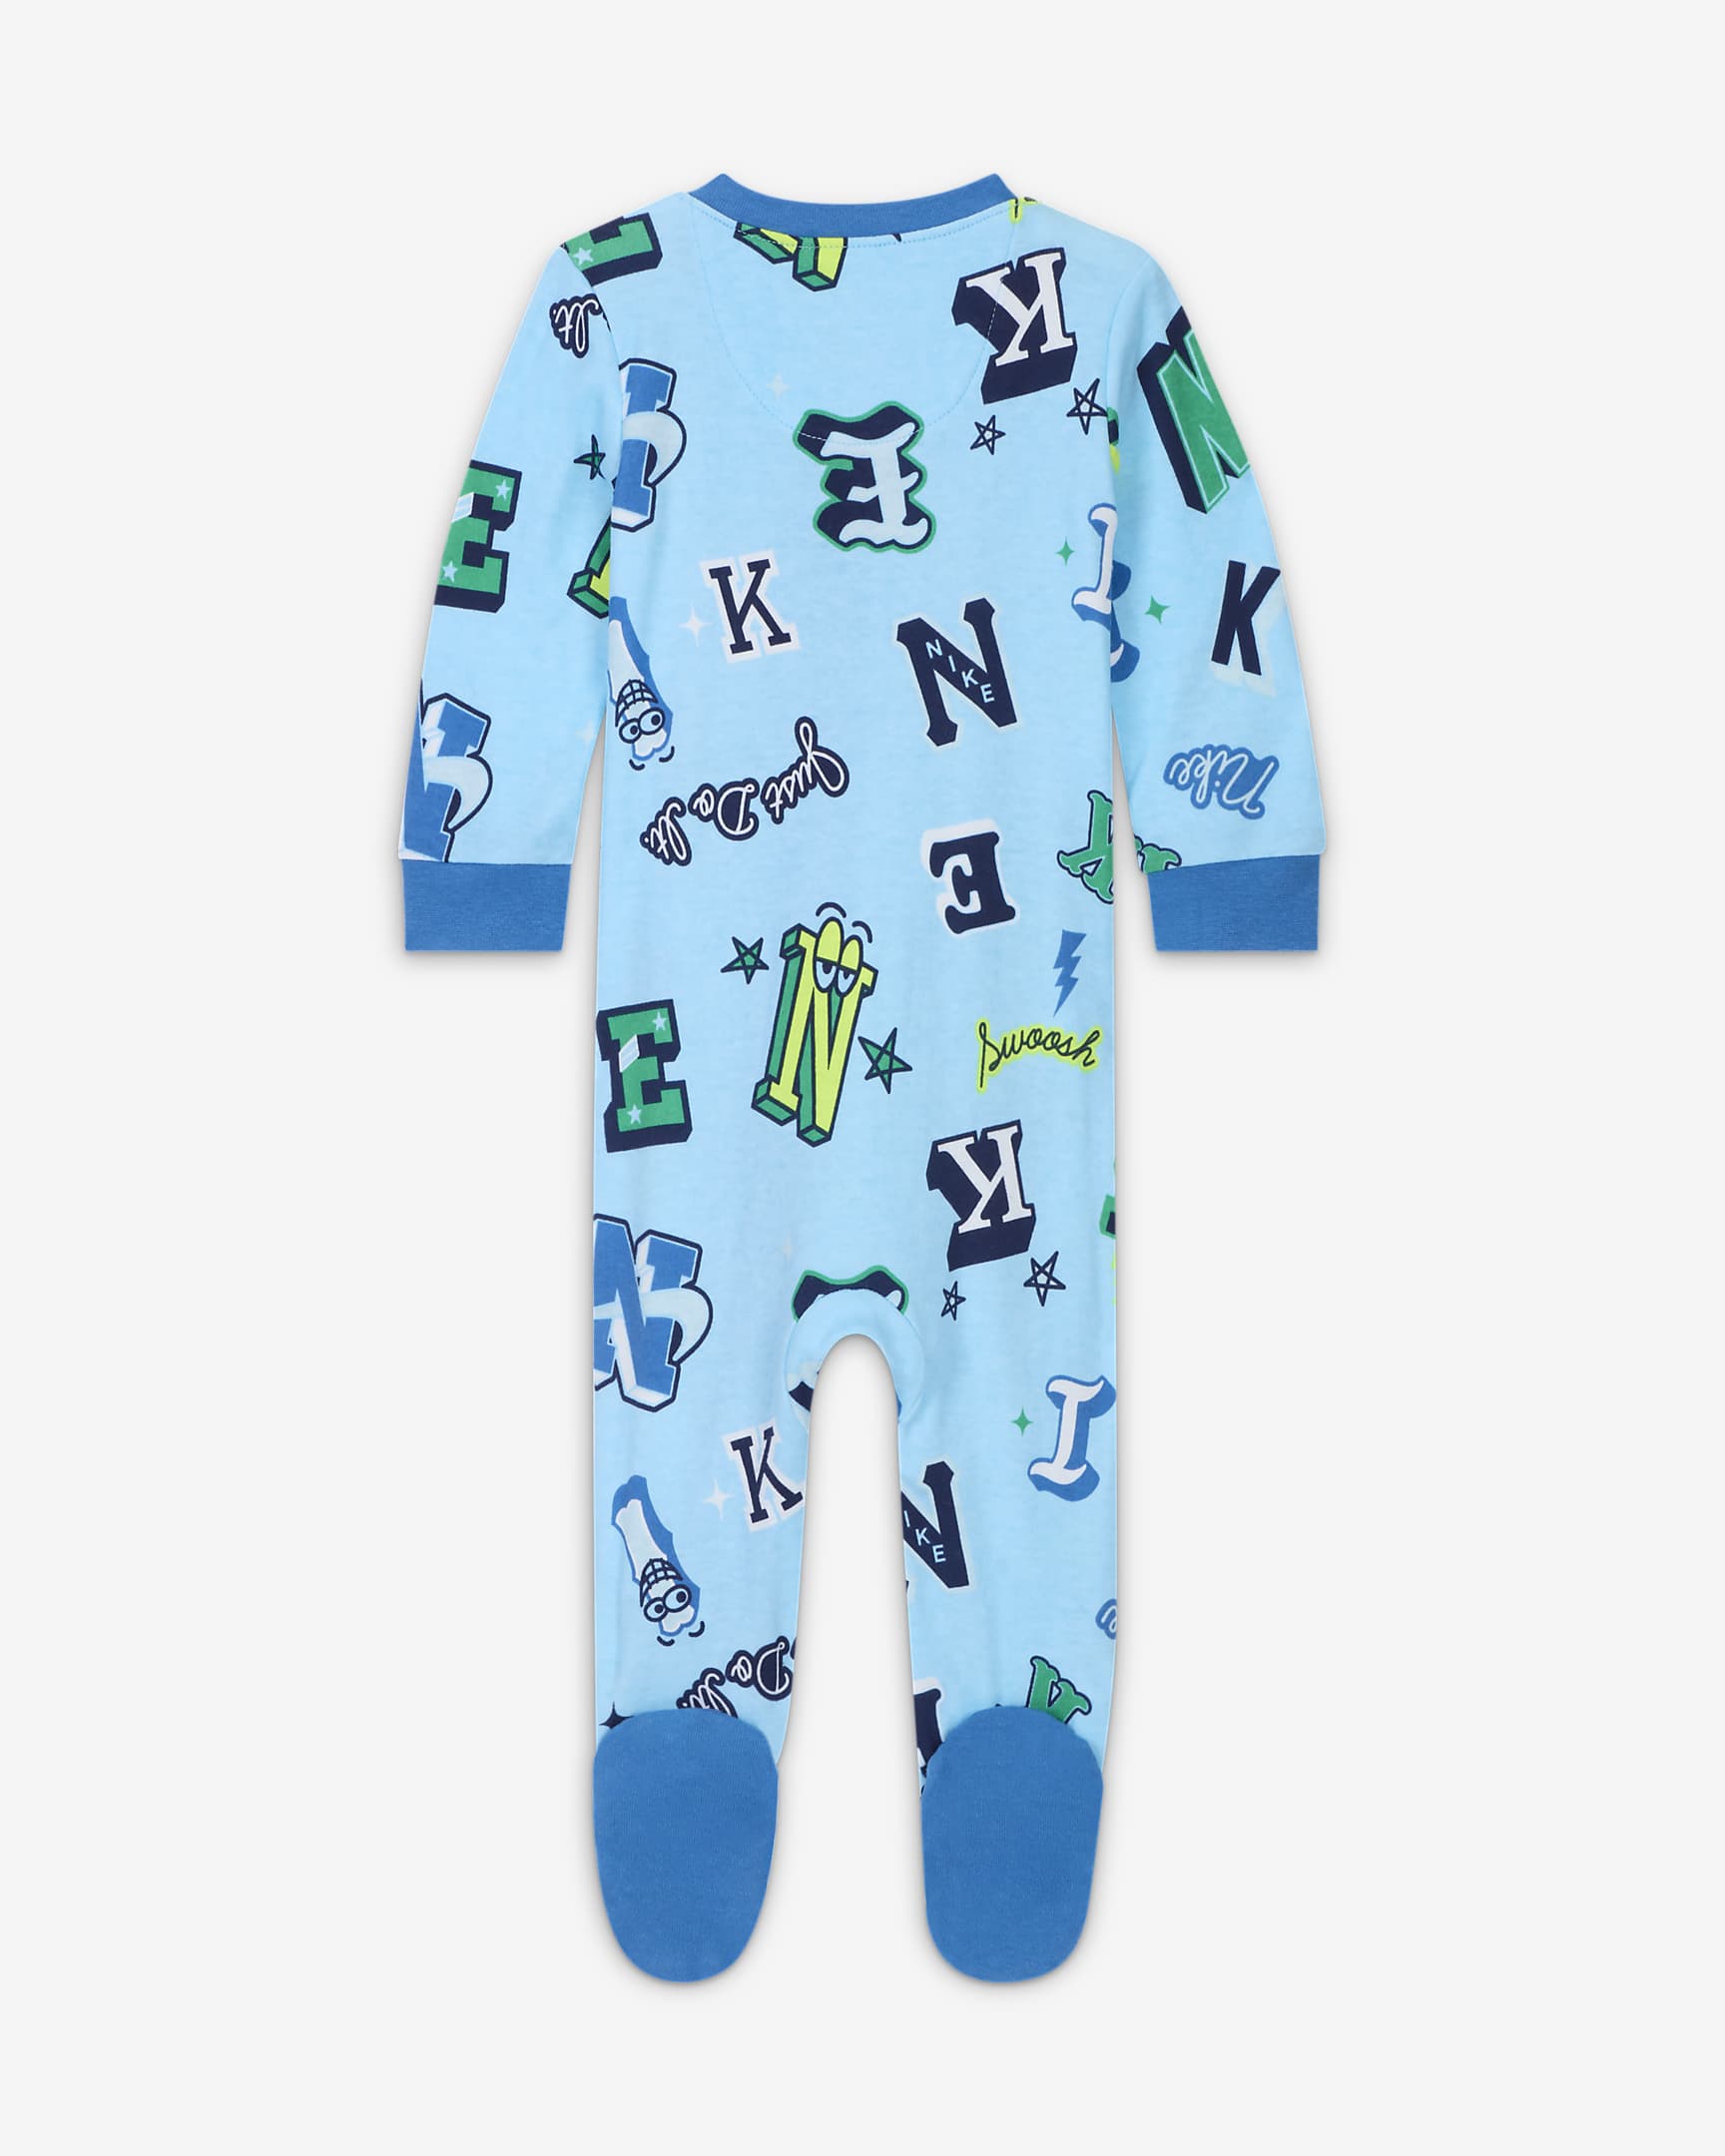 Nike Sportswear Next Gen Baby (0-9M) Footed Coverall. Nike JP